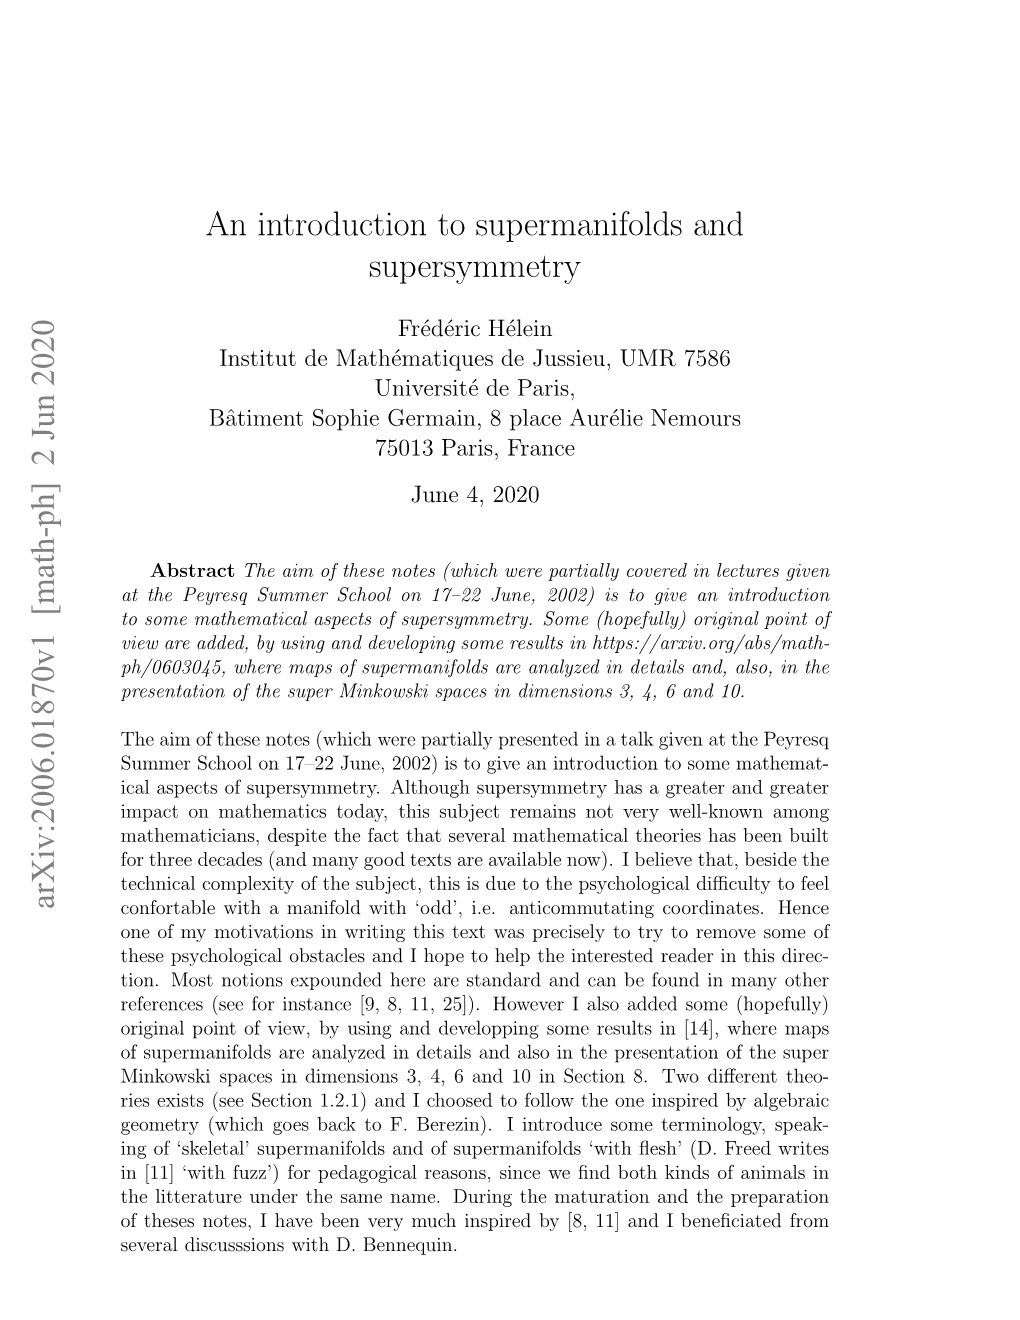 2 Jun 2020 an Introduction to Supermanifolds and Supersymmetry